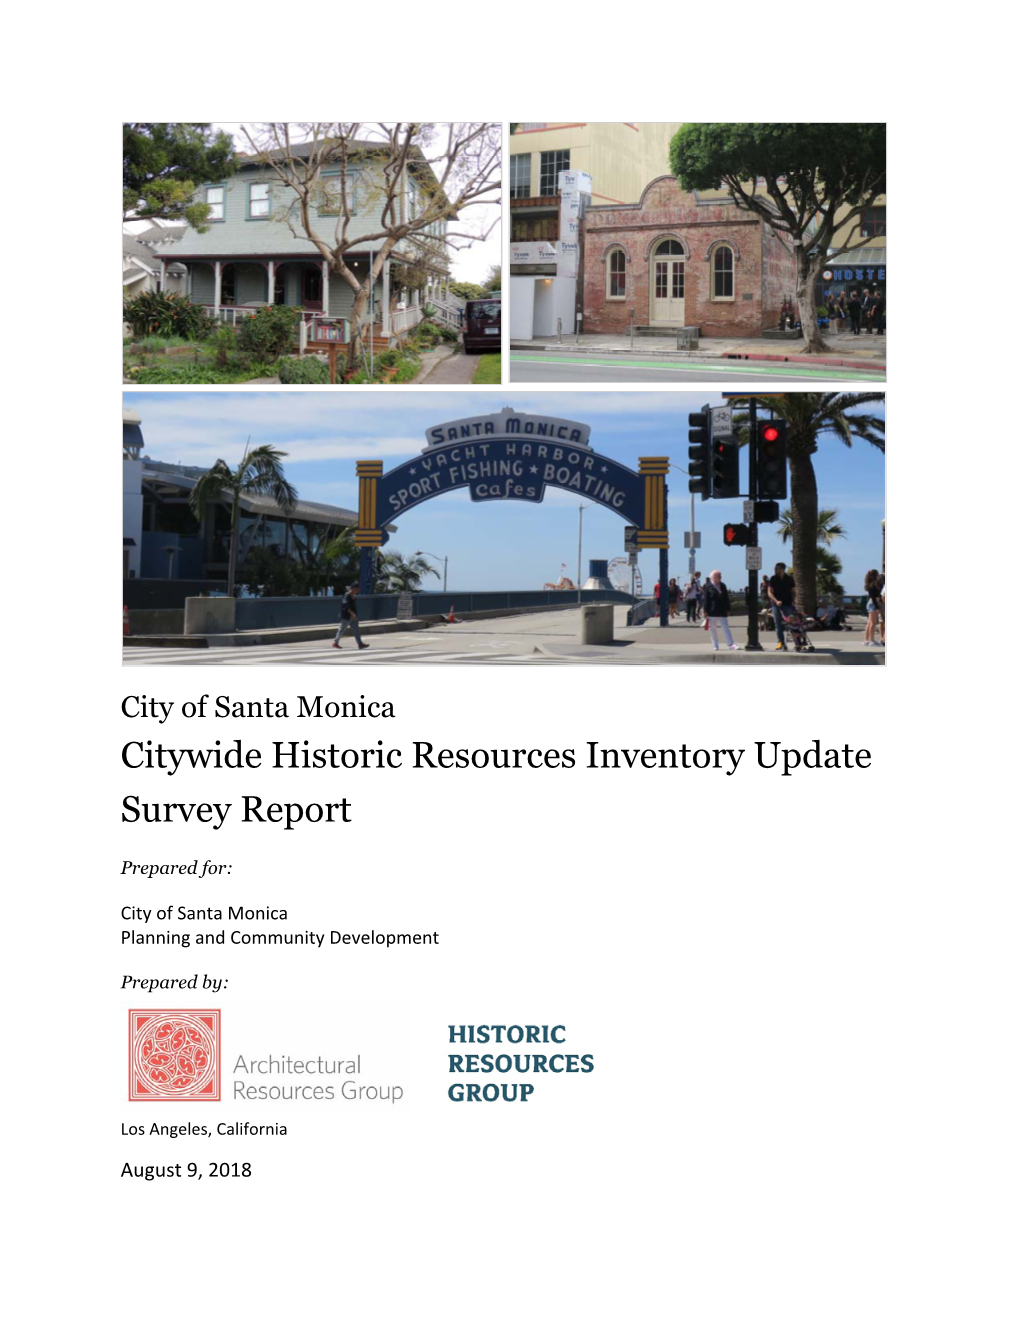 Citywide Historic Resources Inventory Update Survey Report